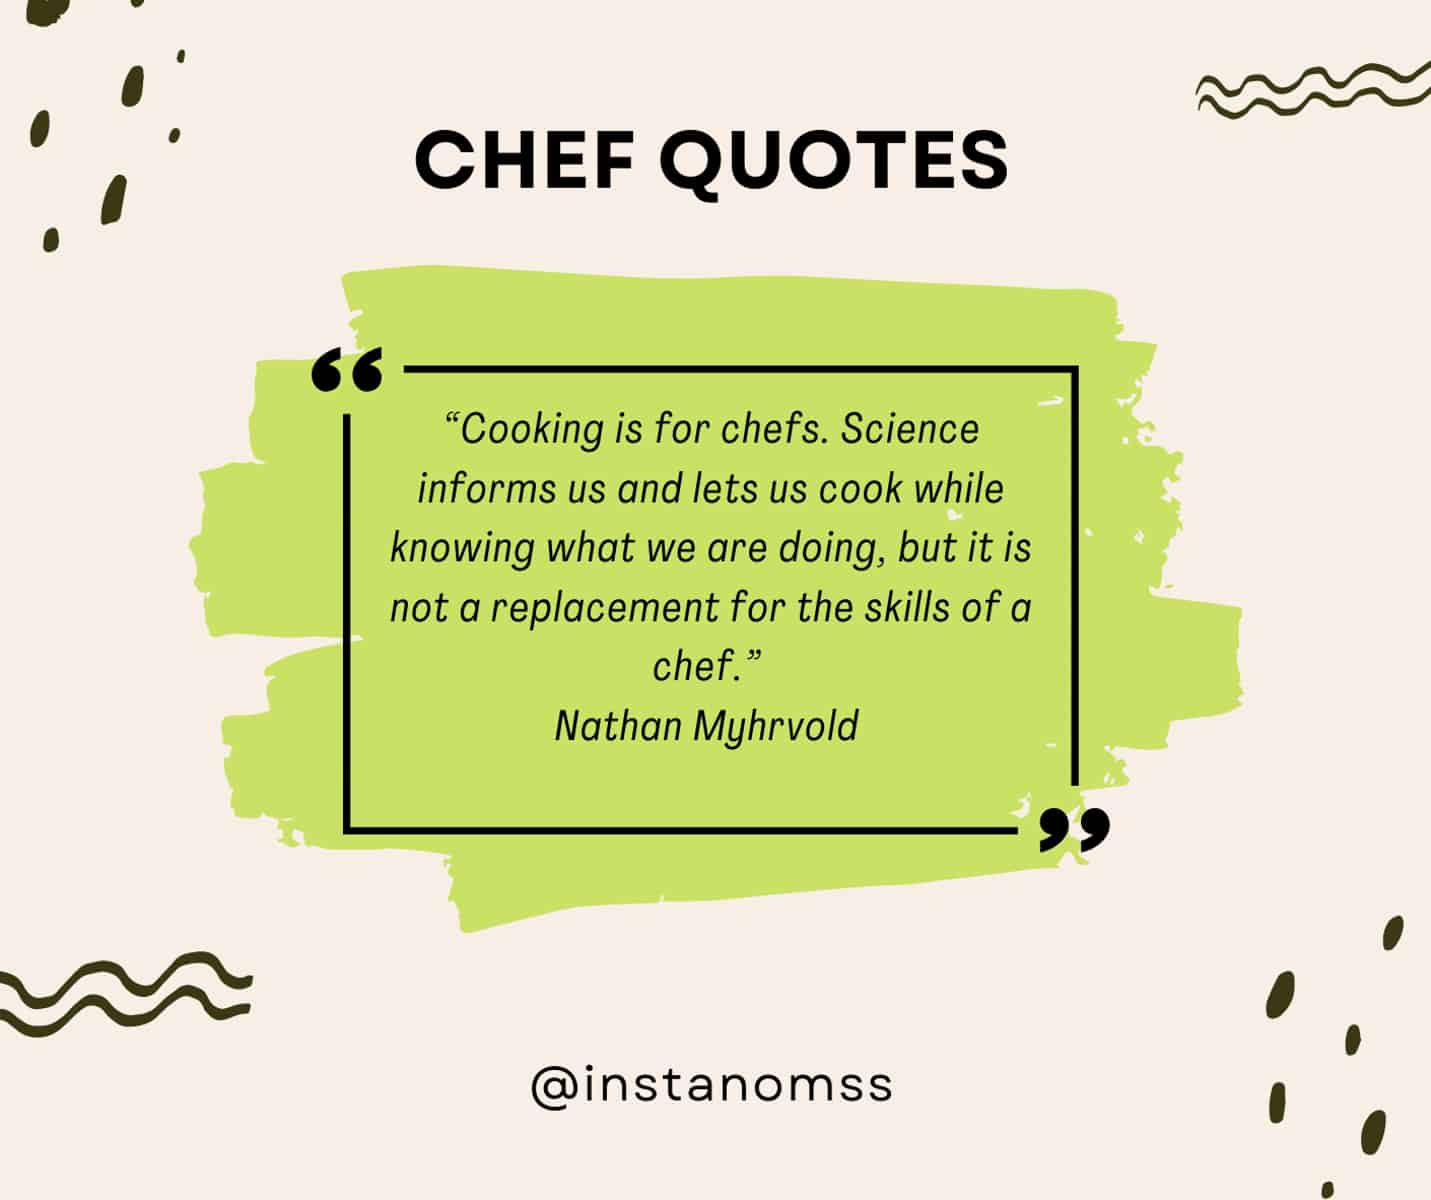 “Cooking is for chefs. Science informs us and lets us cook while knowing what we are doing, but it is not a replacement for the skills of a chef.” Nathan Myhrvold , Chef quotes about cooking